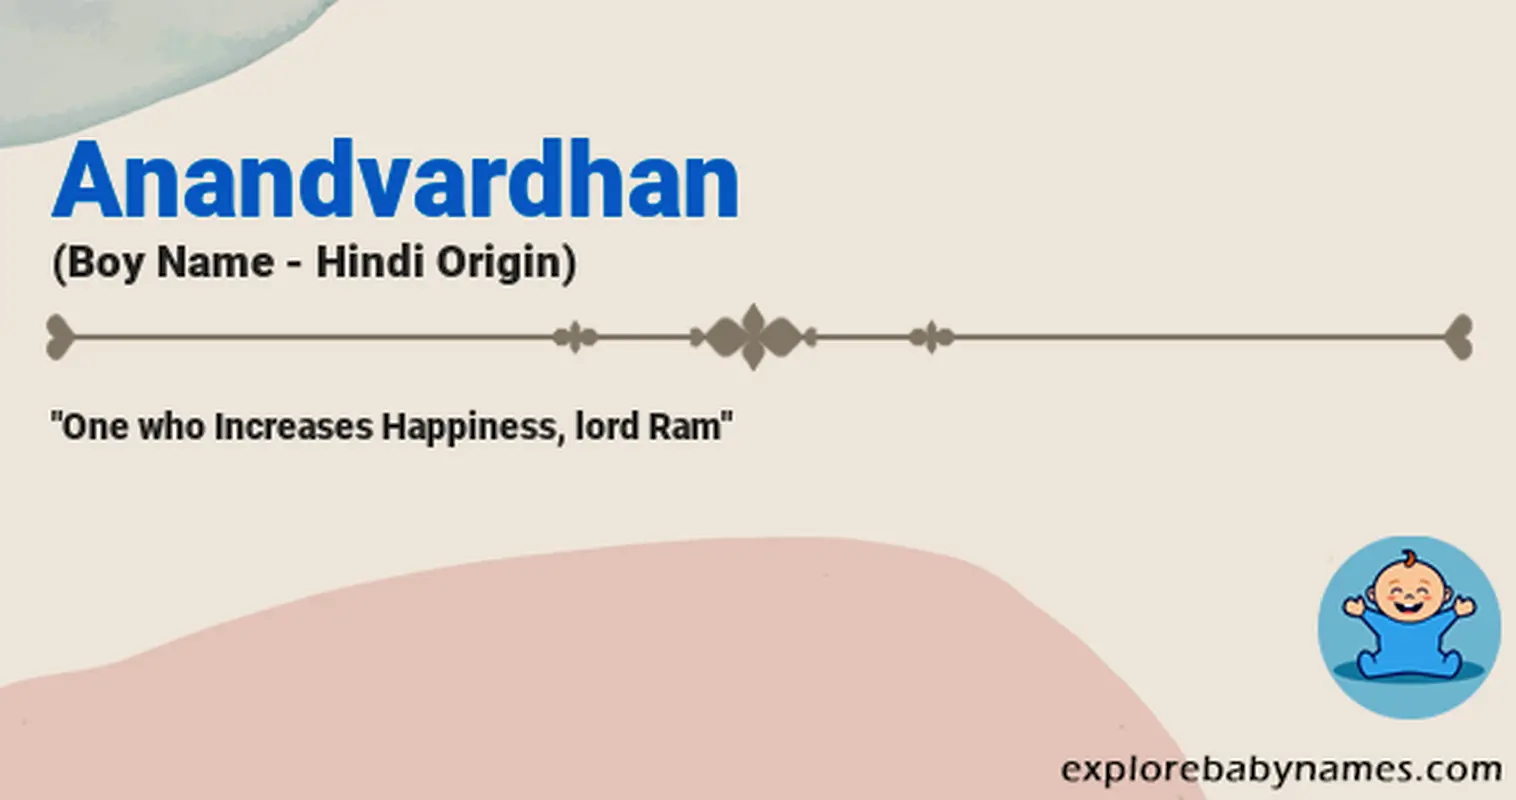 Meaning of Anandvardhan